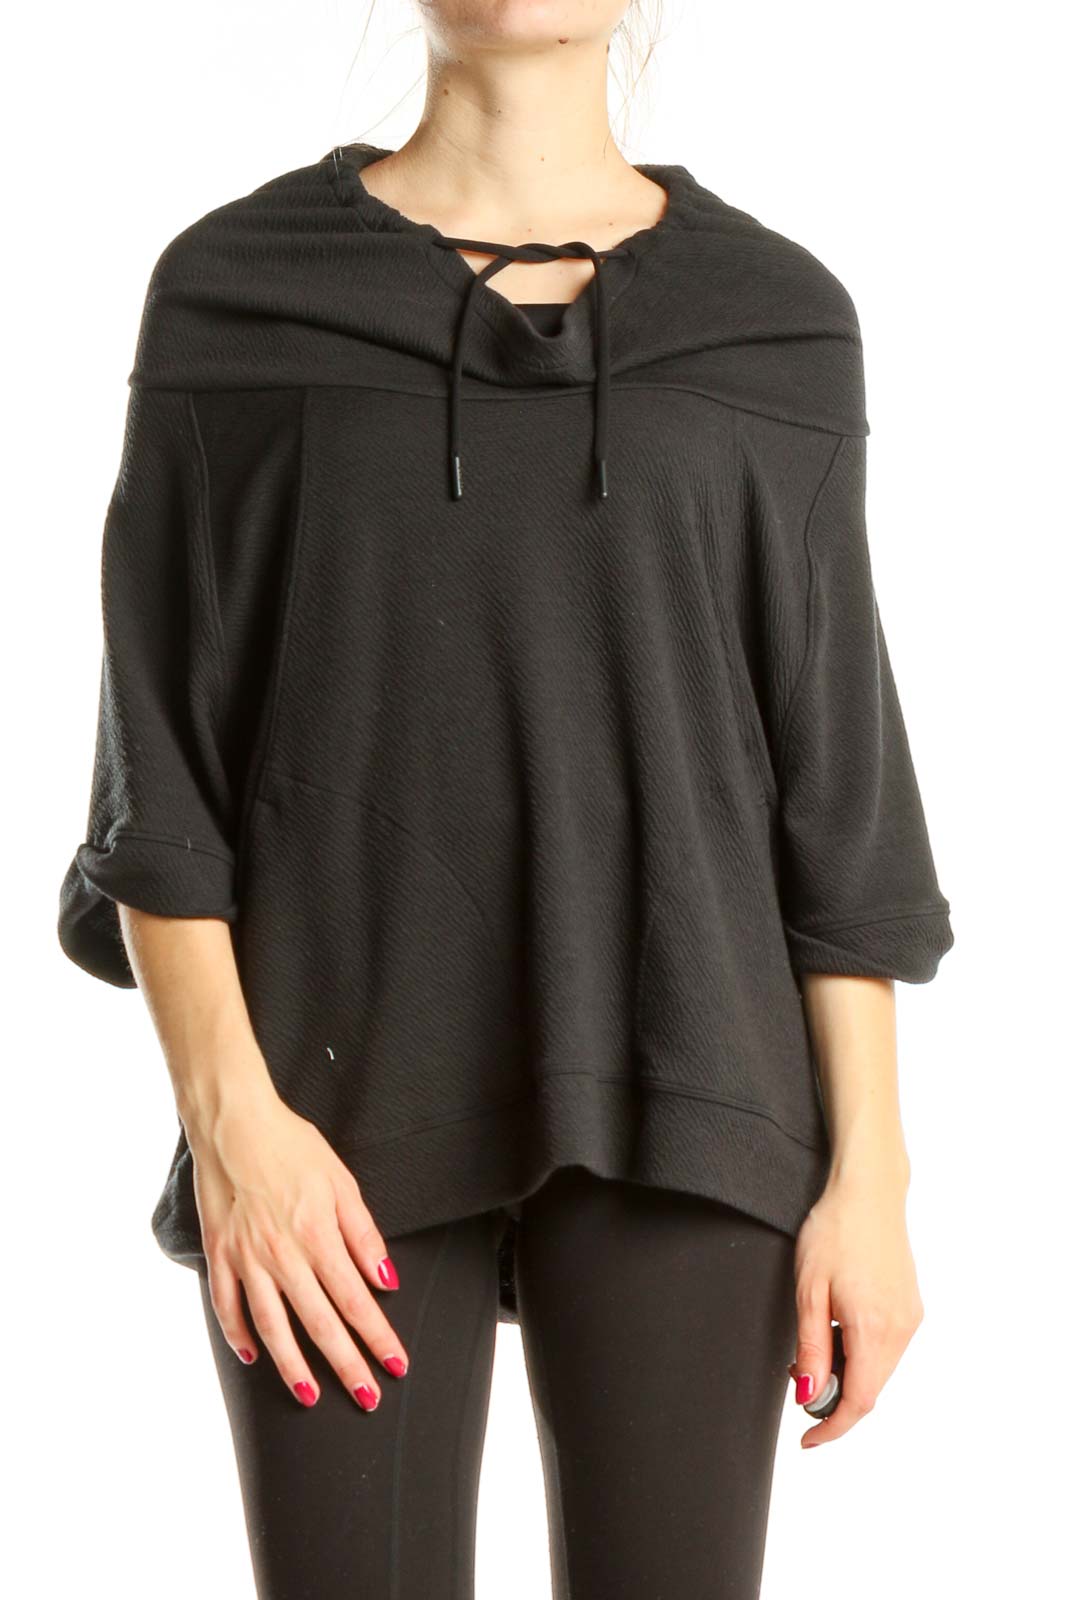 Black Slouchy All Day Wear Sweater Front